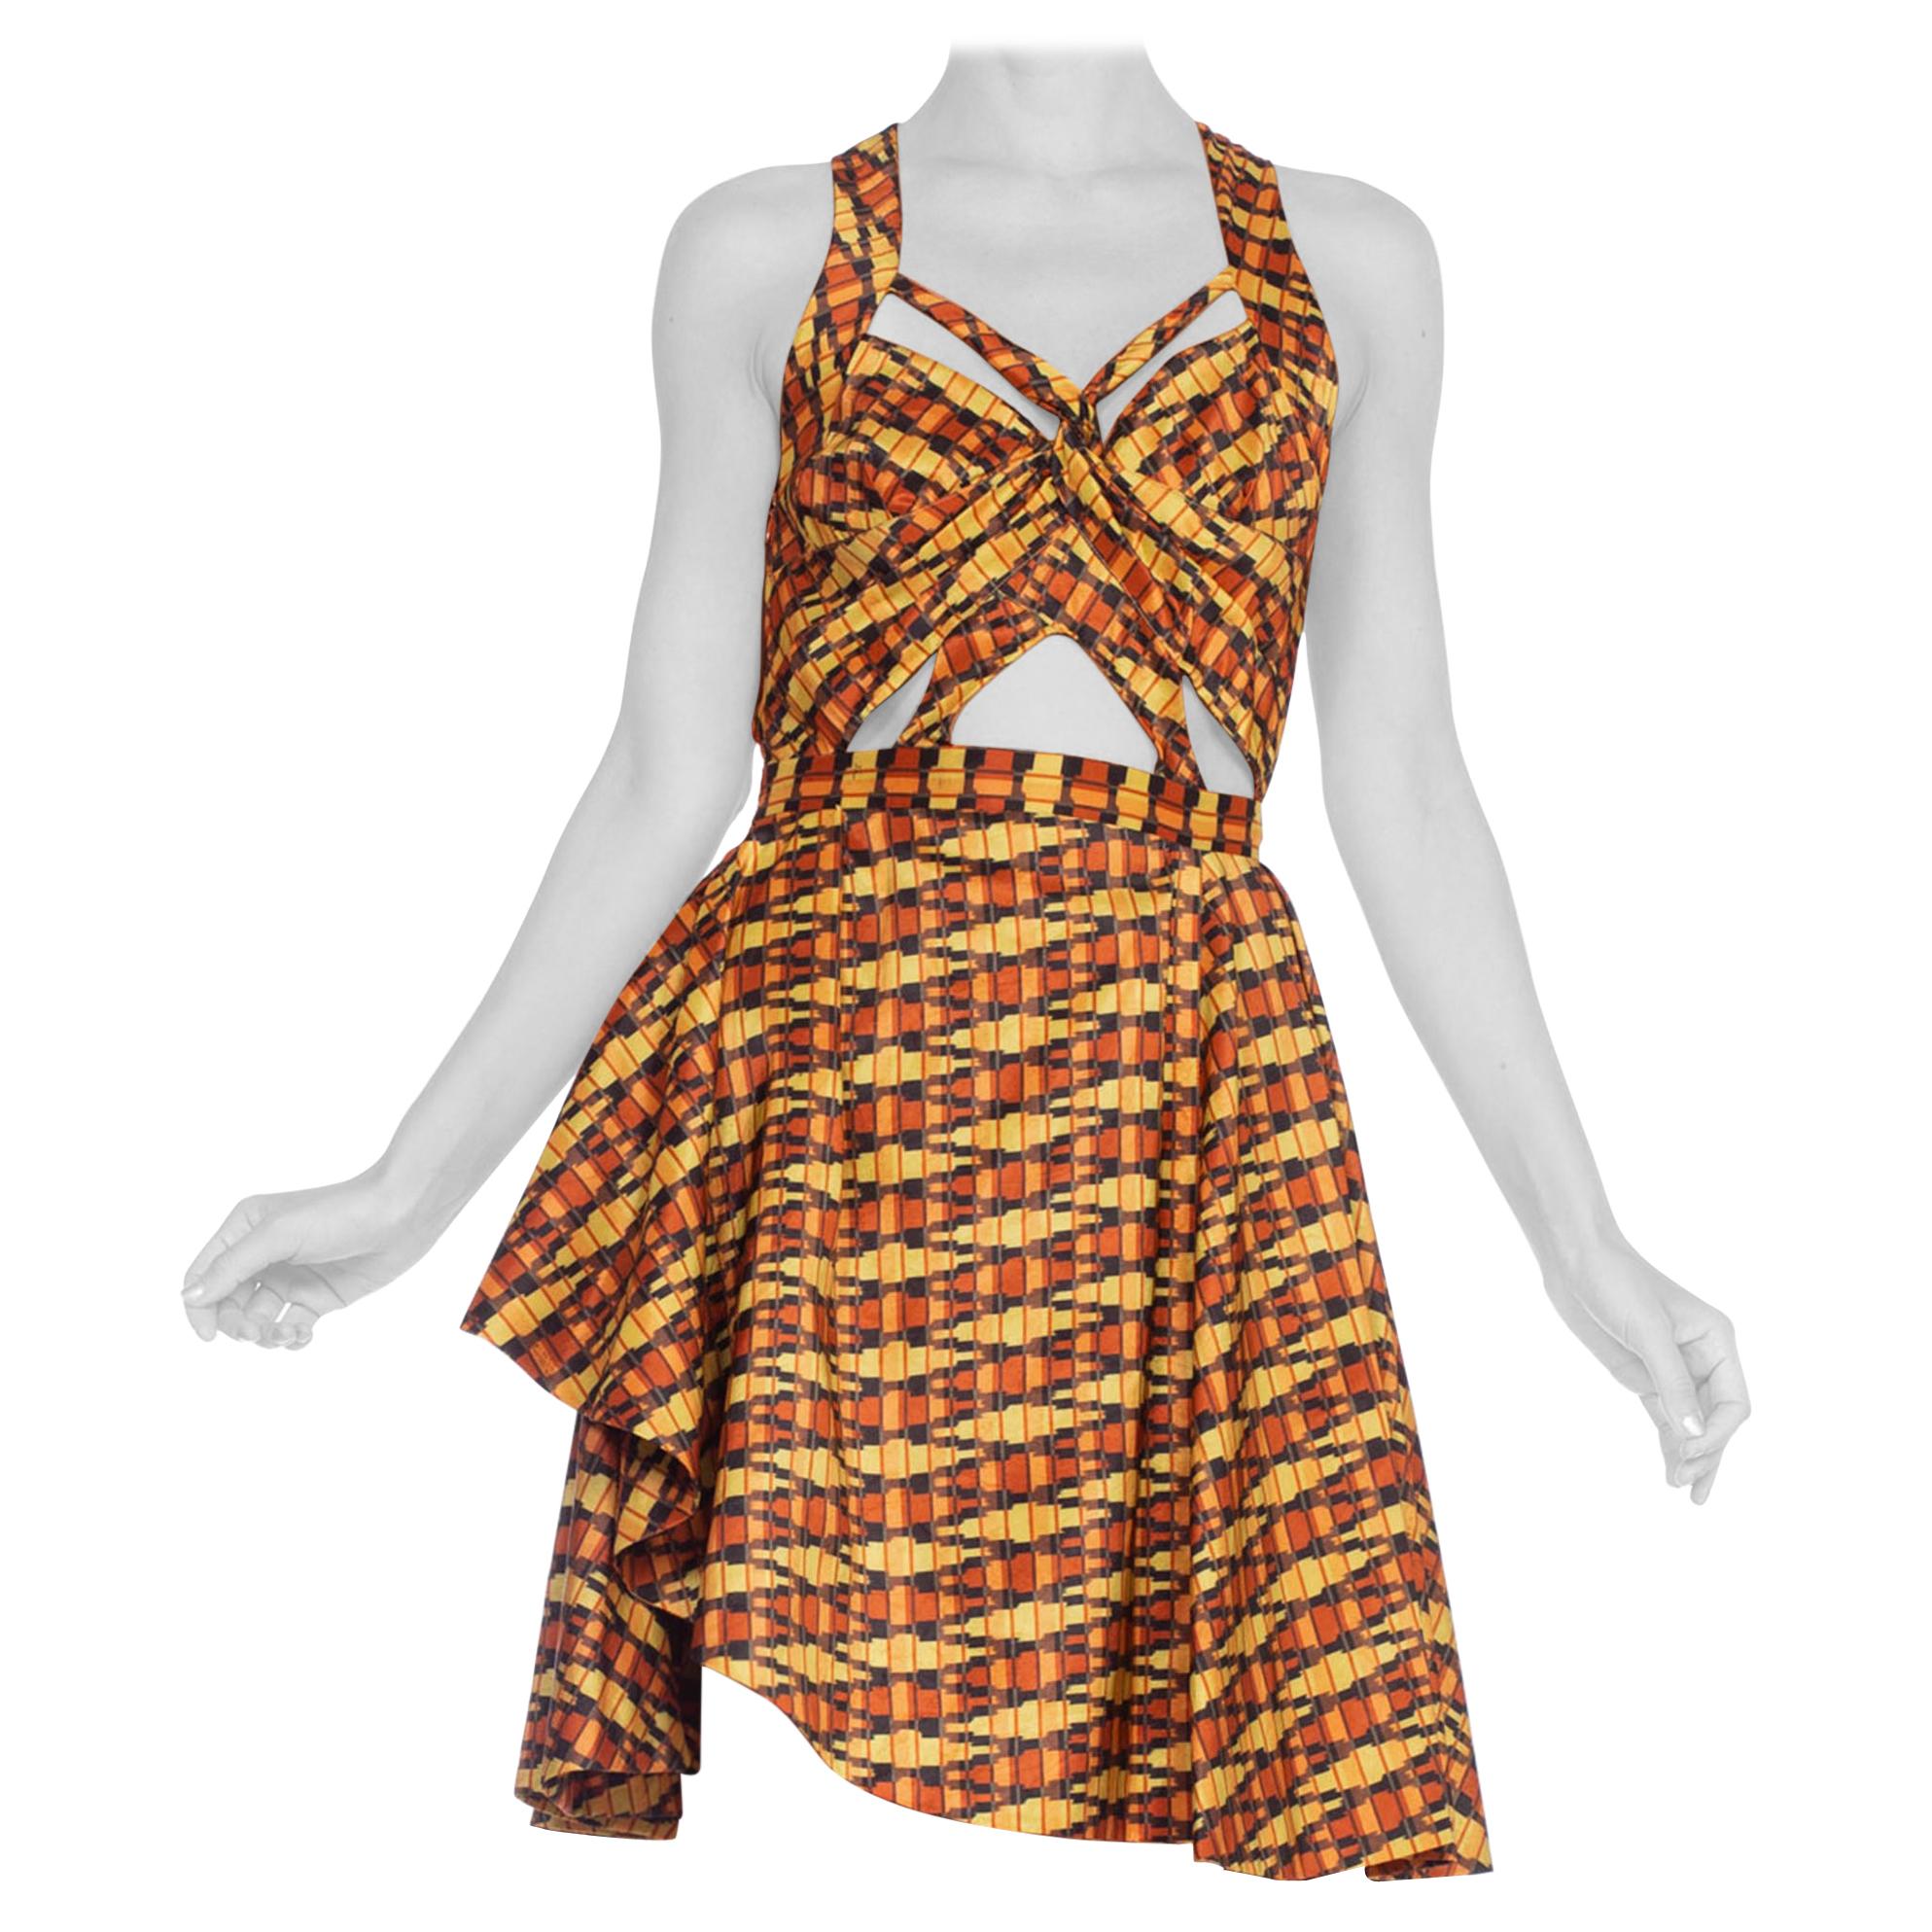 MORPHEW COLLECTION Hand Woven Silk Ikat Dress With Peek-A-Boo Front & Slit